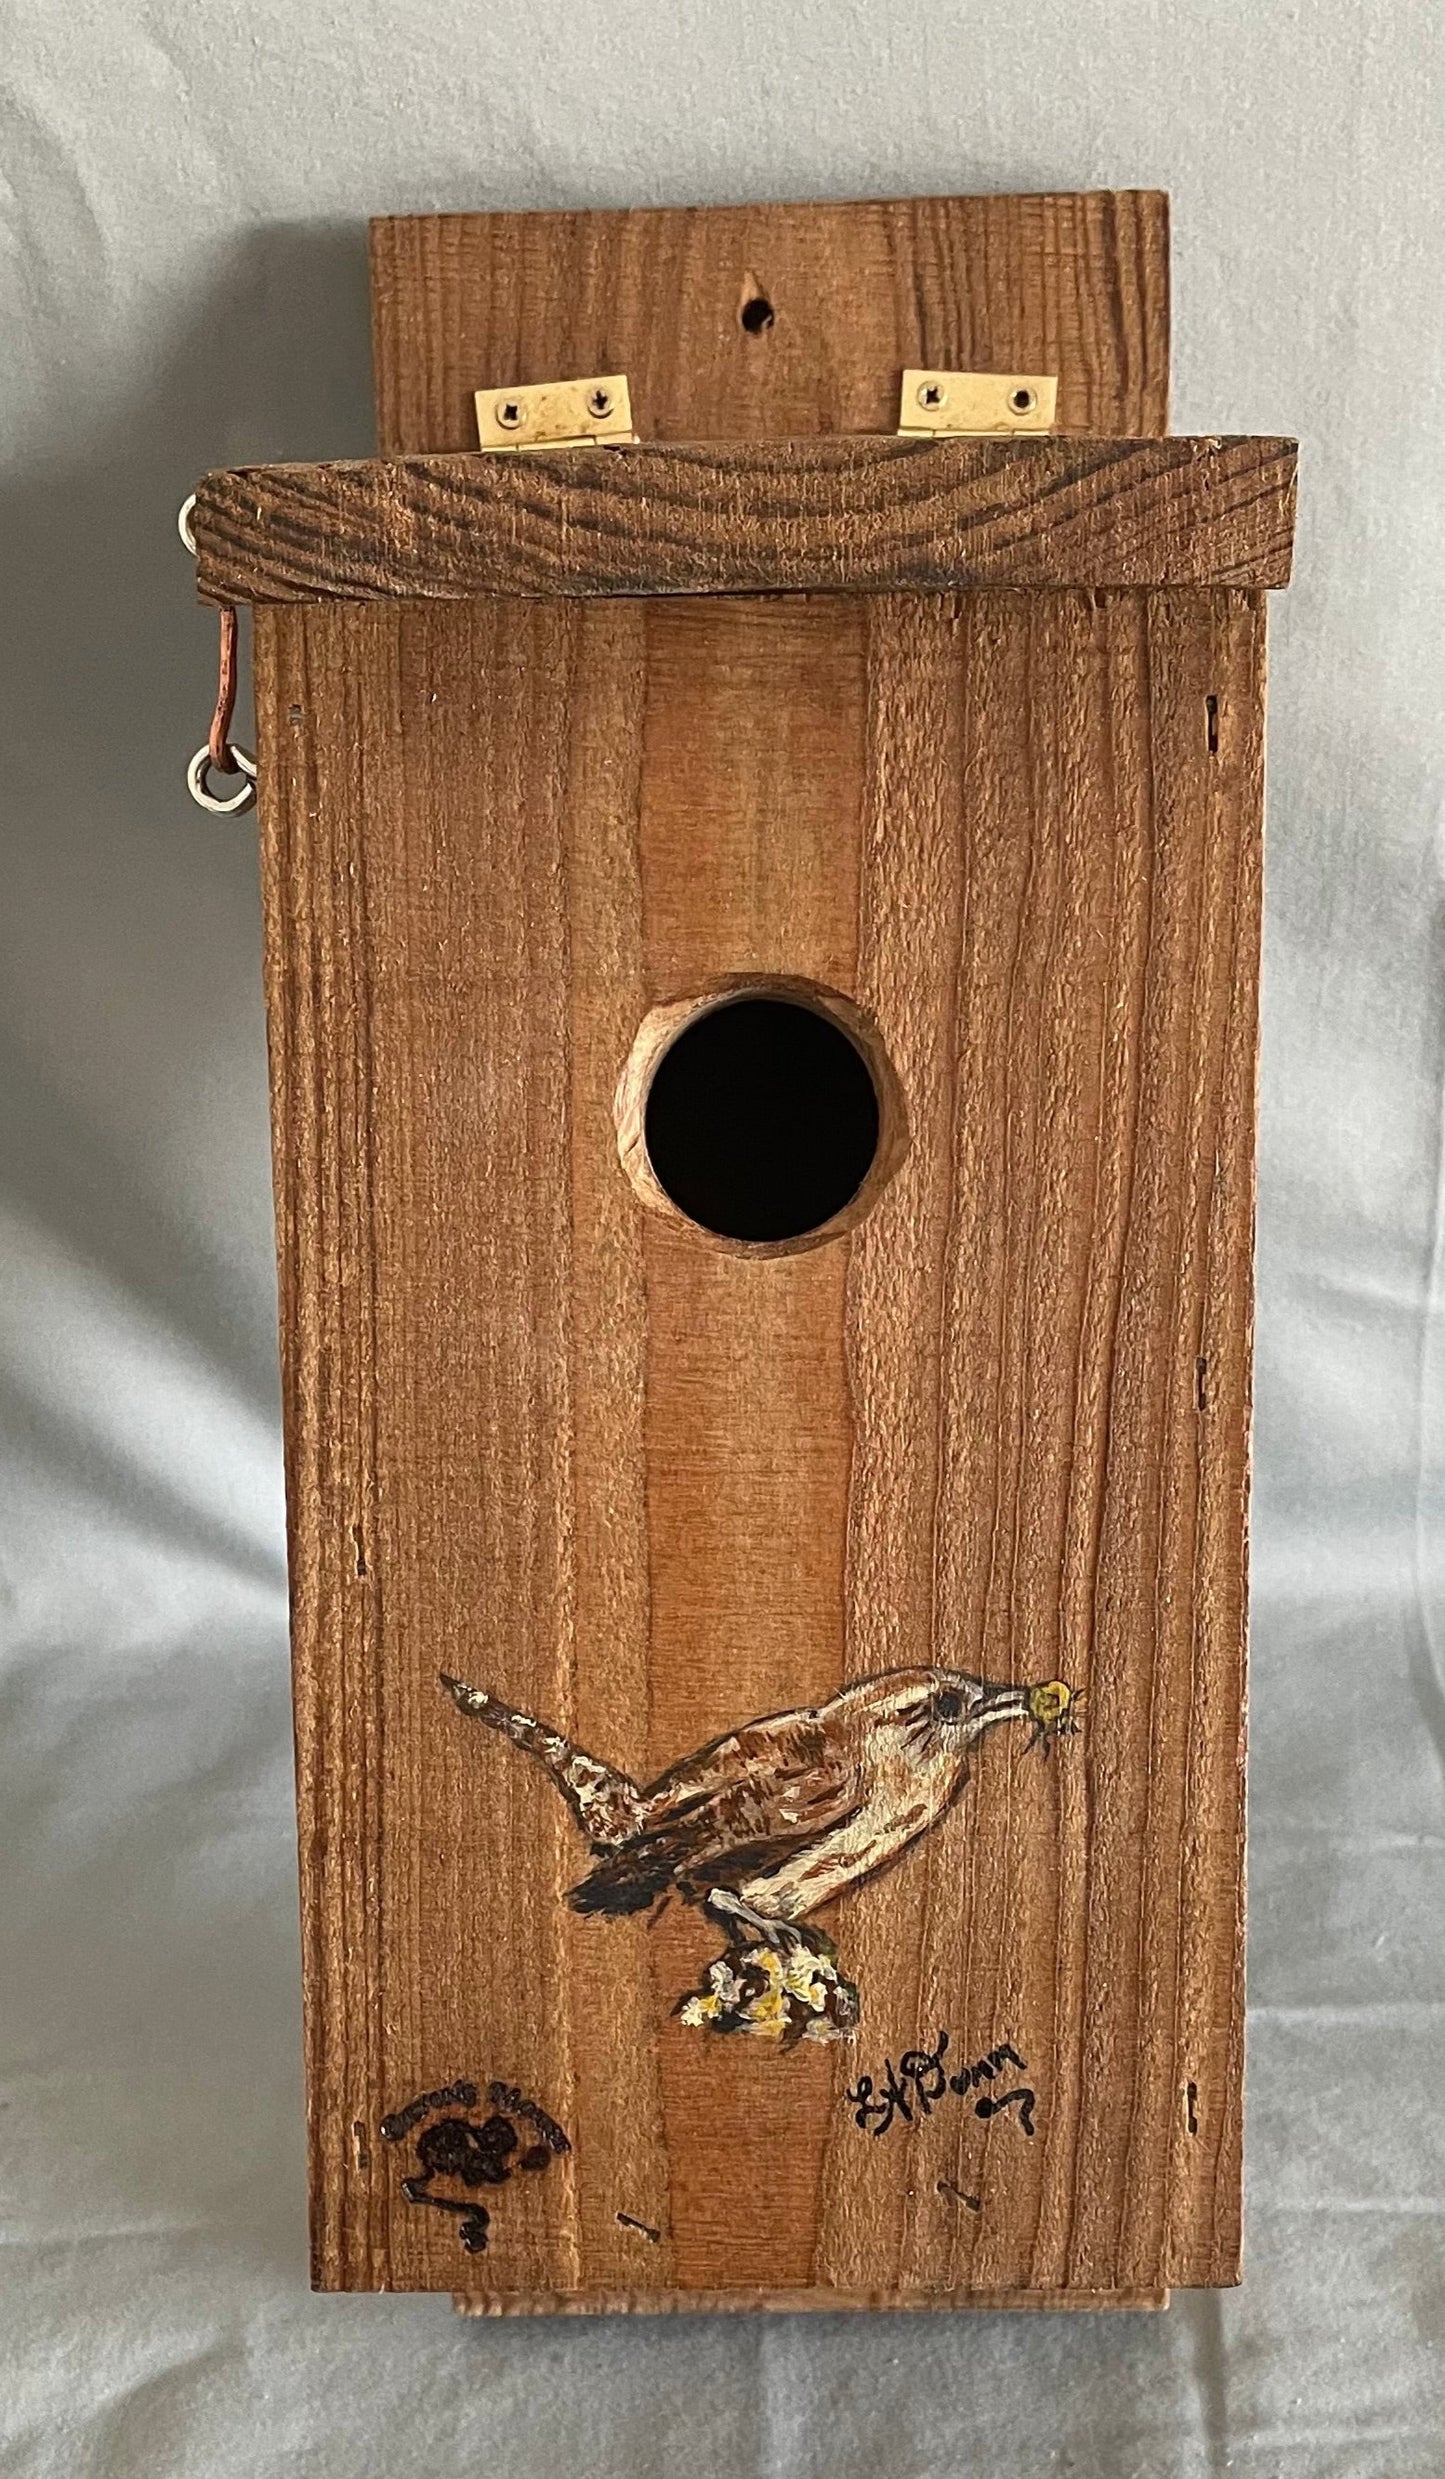 All cedar box, roof and floor with a cute wren painted on front  Hook and eye bolt closure in the roof allows for easy access to clean the box  Two holes drilled into the back board for screws when hanging the box  Wren nesting boxes will also house Chickadees and Finches  14" tall x 5" wide x 6 1/2" long